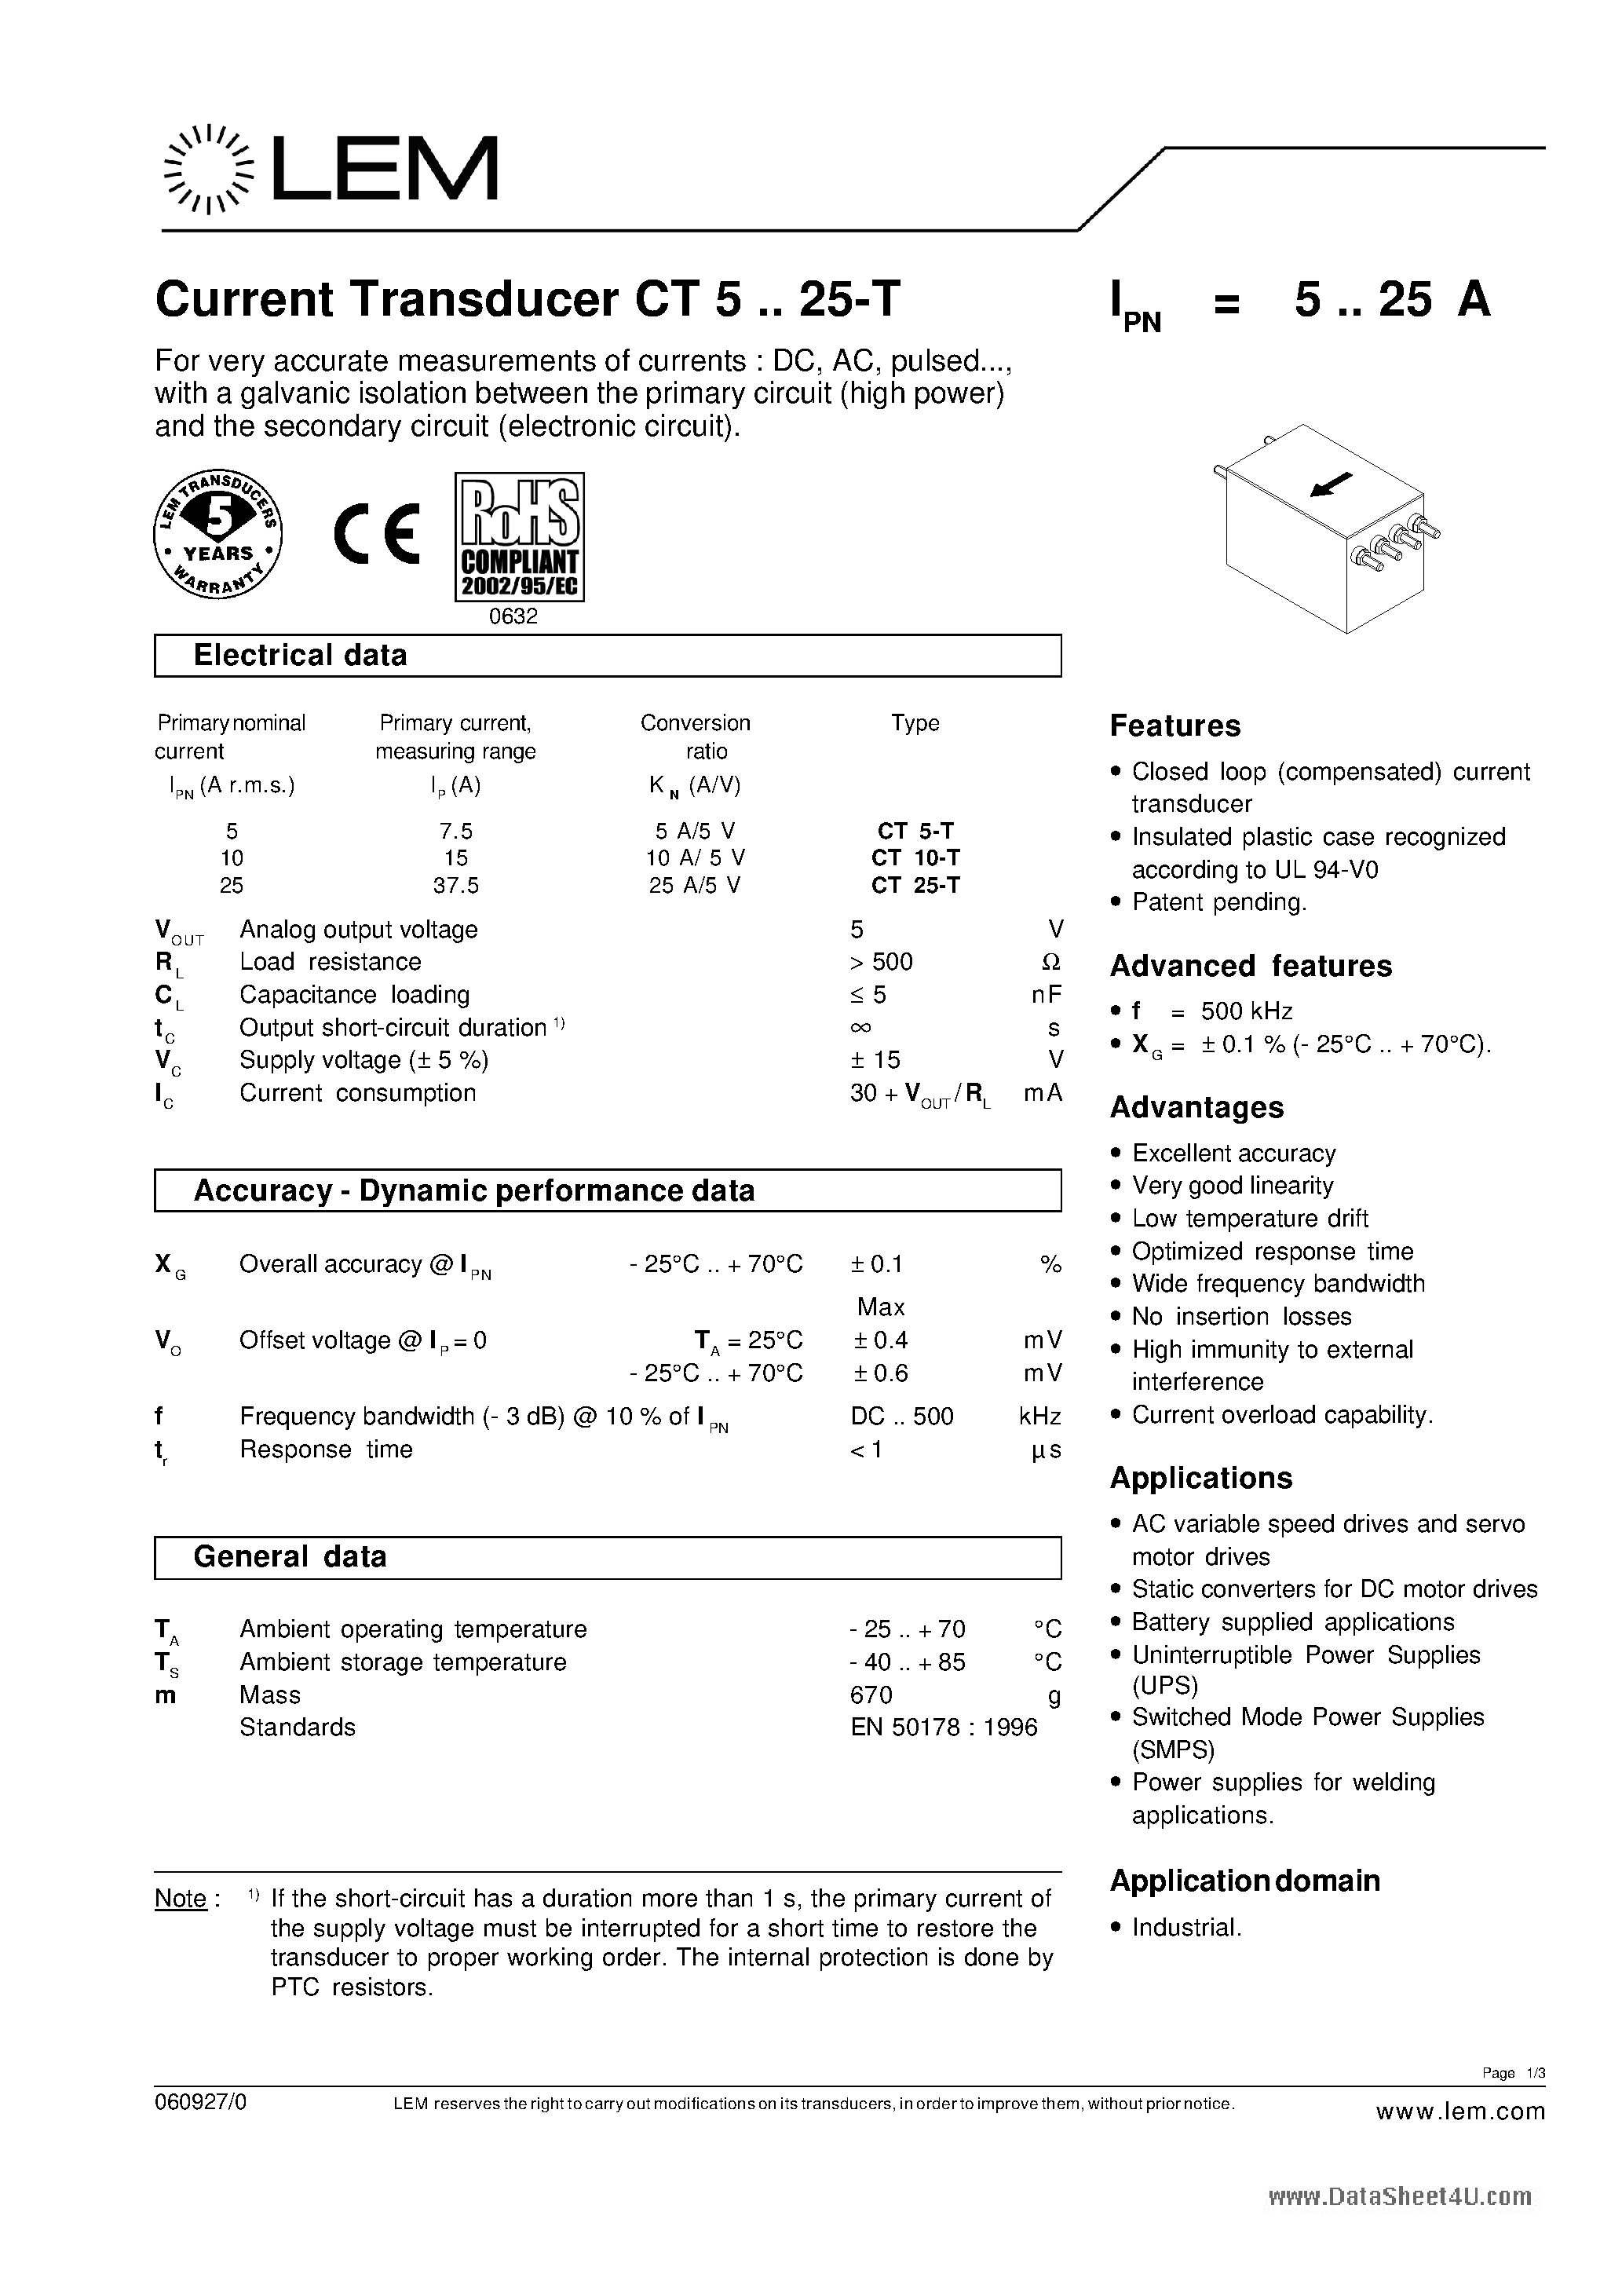 Datasheet CT5-T - Current Transducer page 1